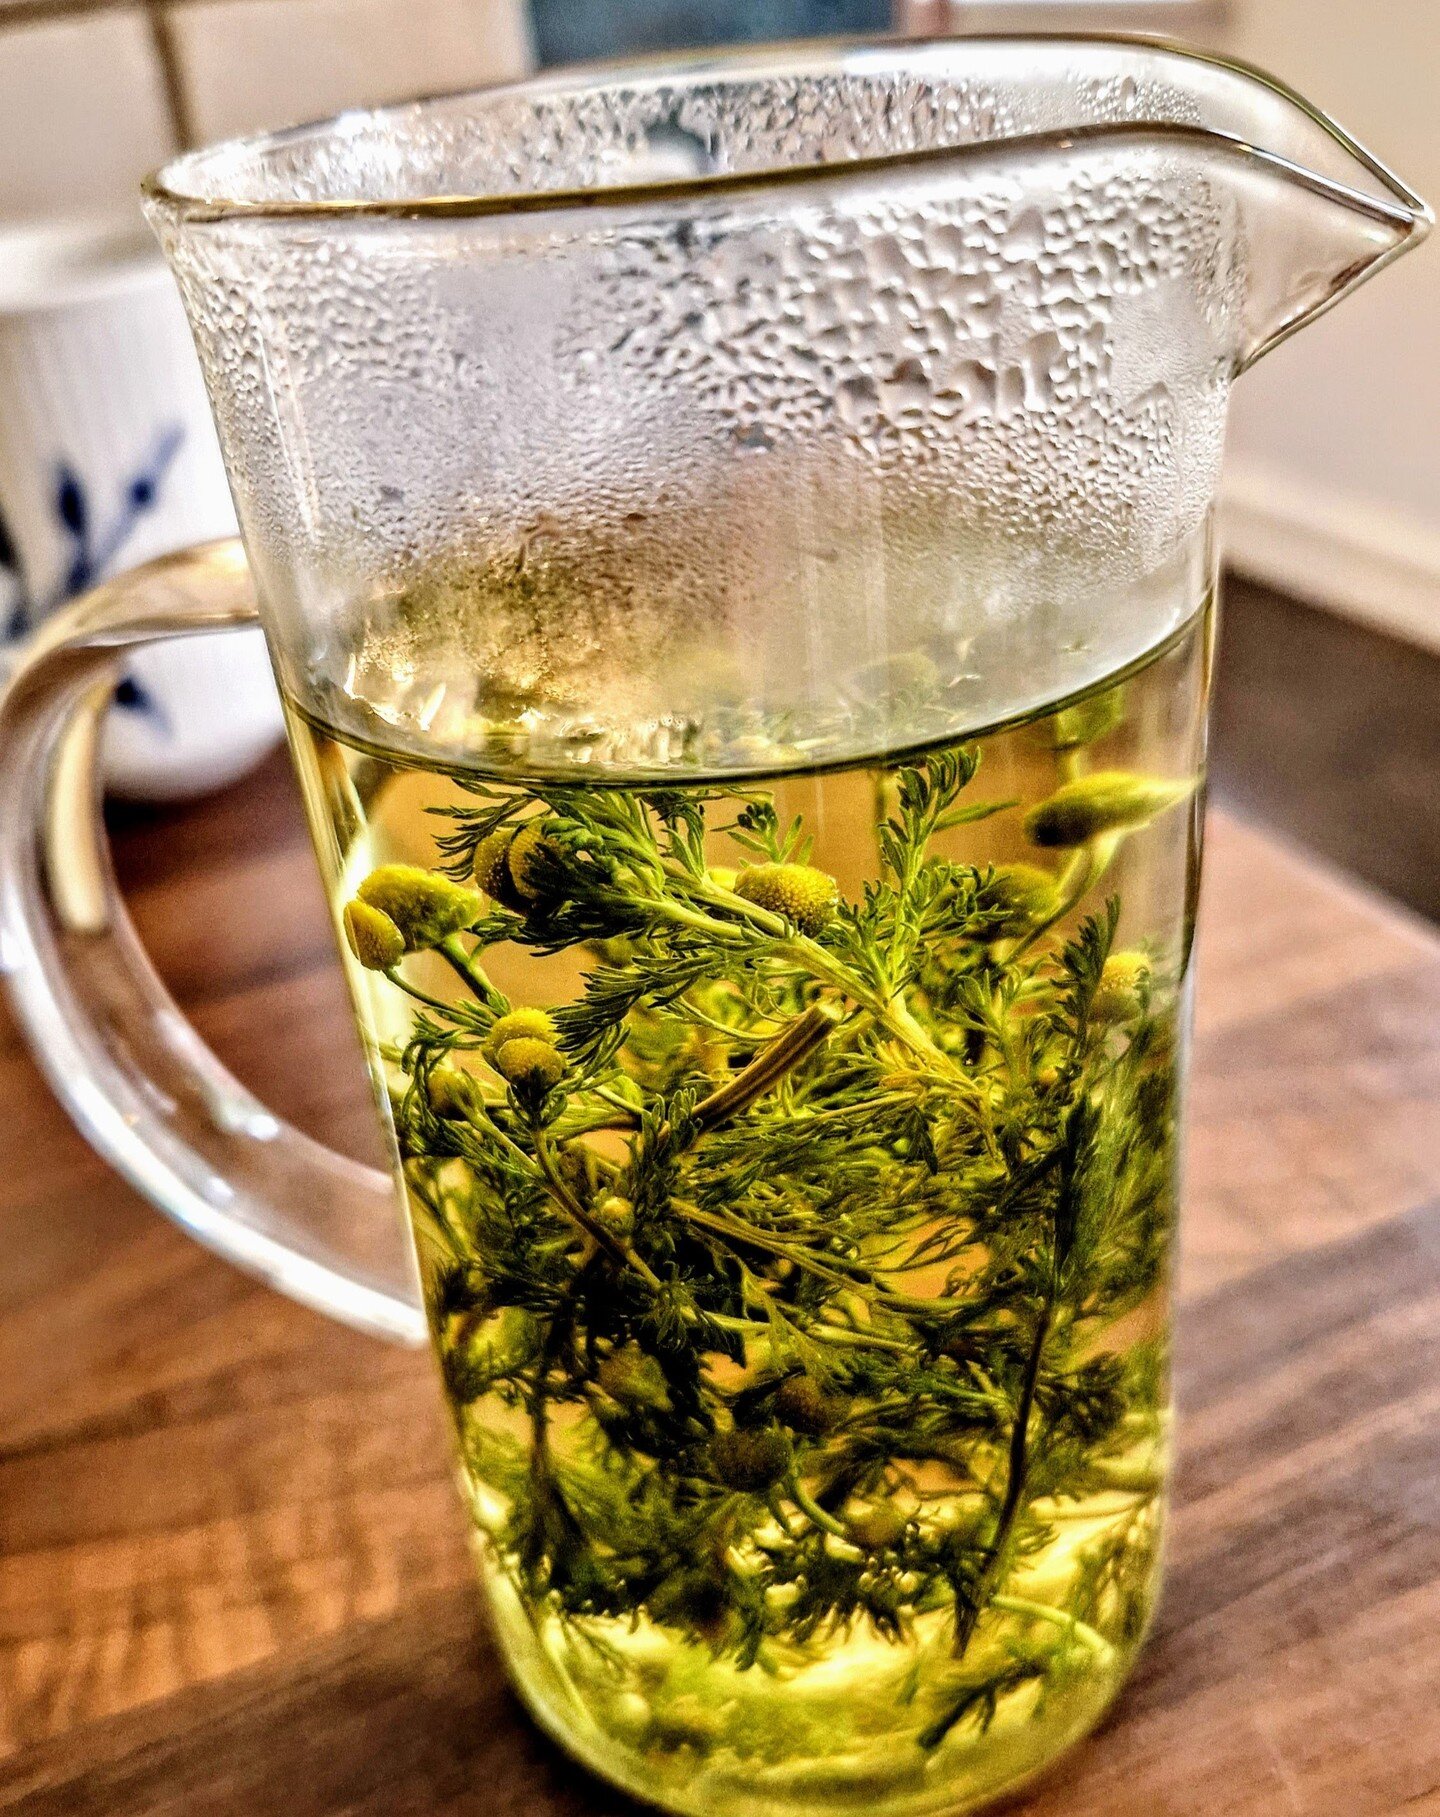 Nothing beats a cozy evening with a steaming pot of homegrown chamomile tea 🌼☕. Each sip is like a hug from within, soothing and warm. Did you know that we forage our own chamomile? (see our journey here 🔗 https://www.verandavikings.com/blog/from-n